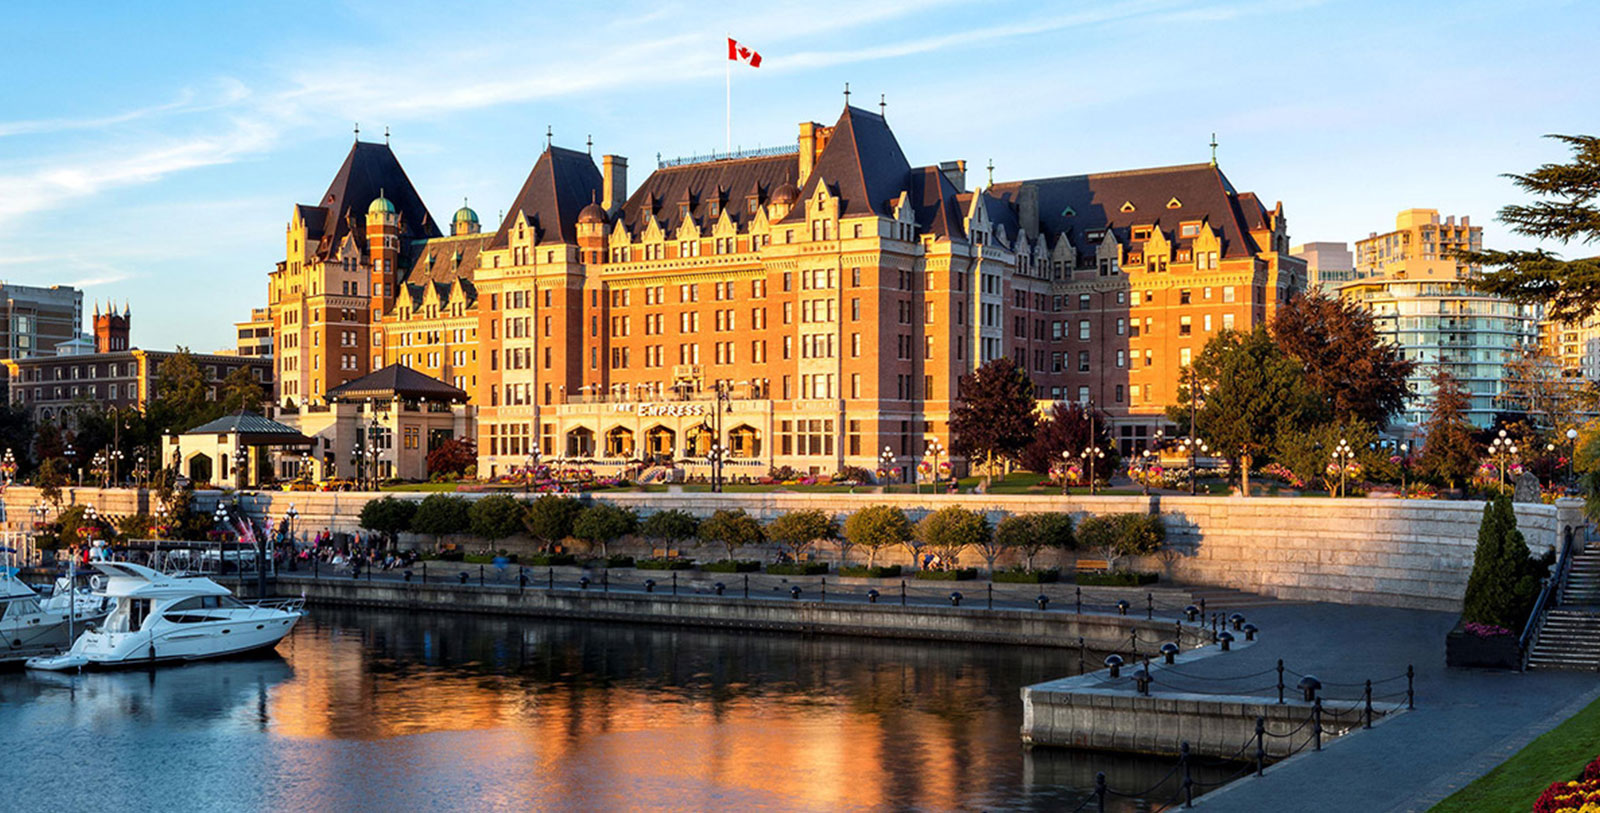 Tour the Royal BC Museum, The Maritime Museum of British Columbia, and the Old Victoria Customs House.